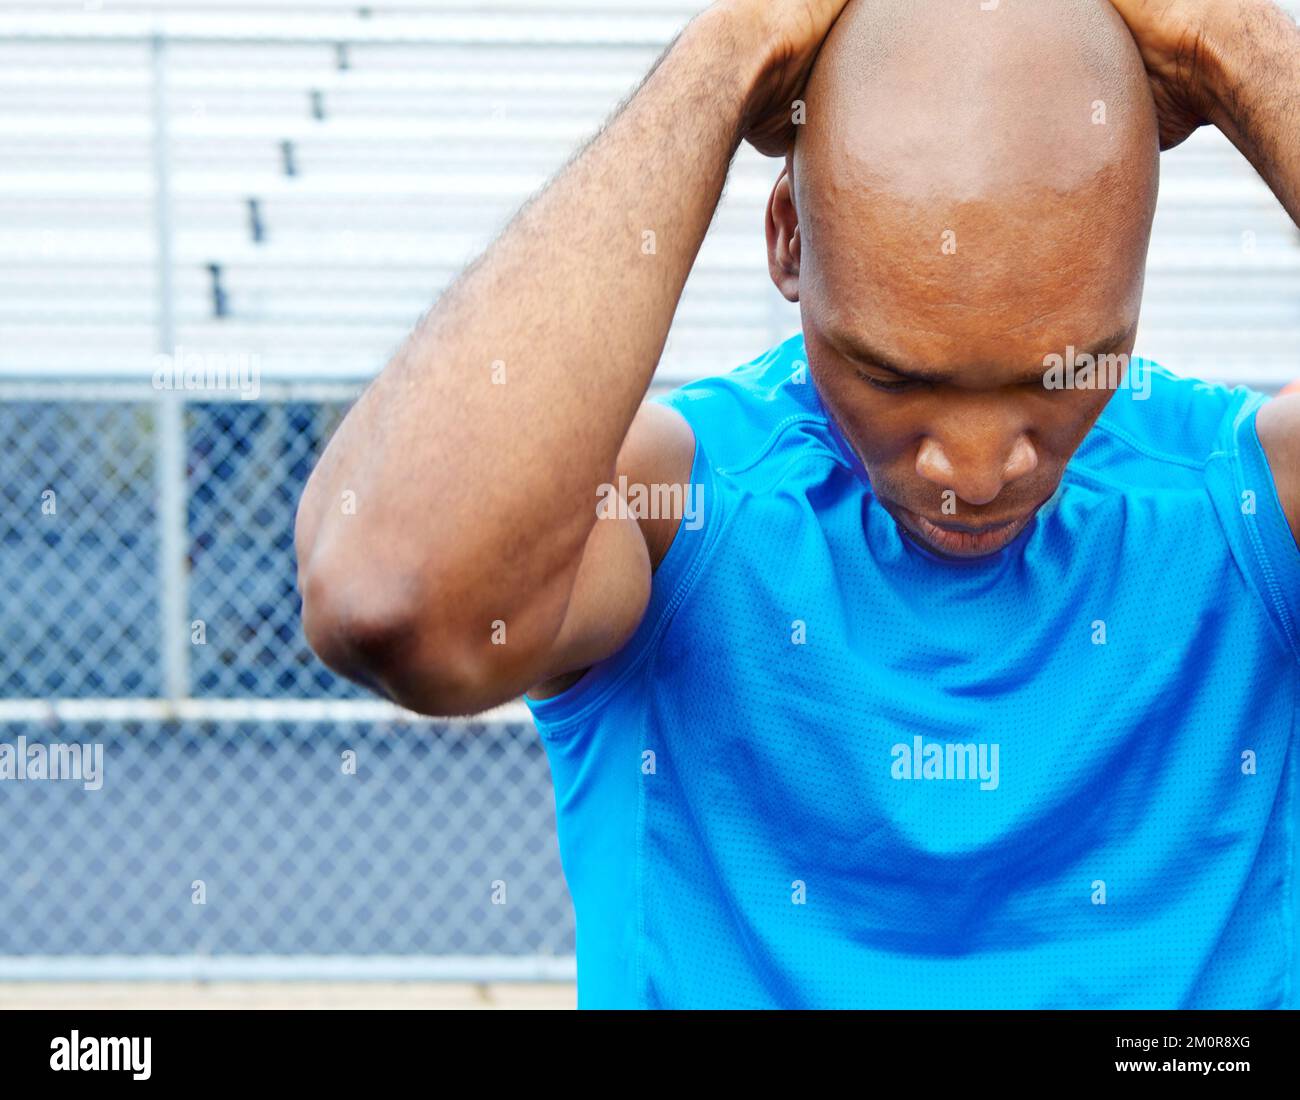 Feeling the pressure to win. Close up shot of a male athlete touching his head with focus. Stock Photo